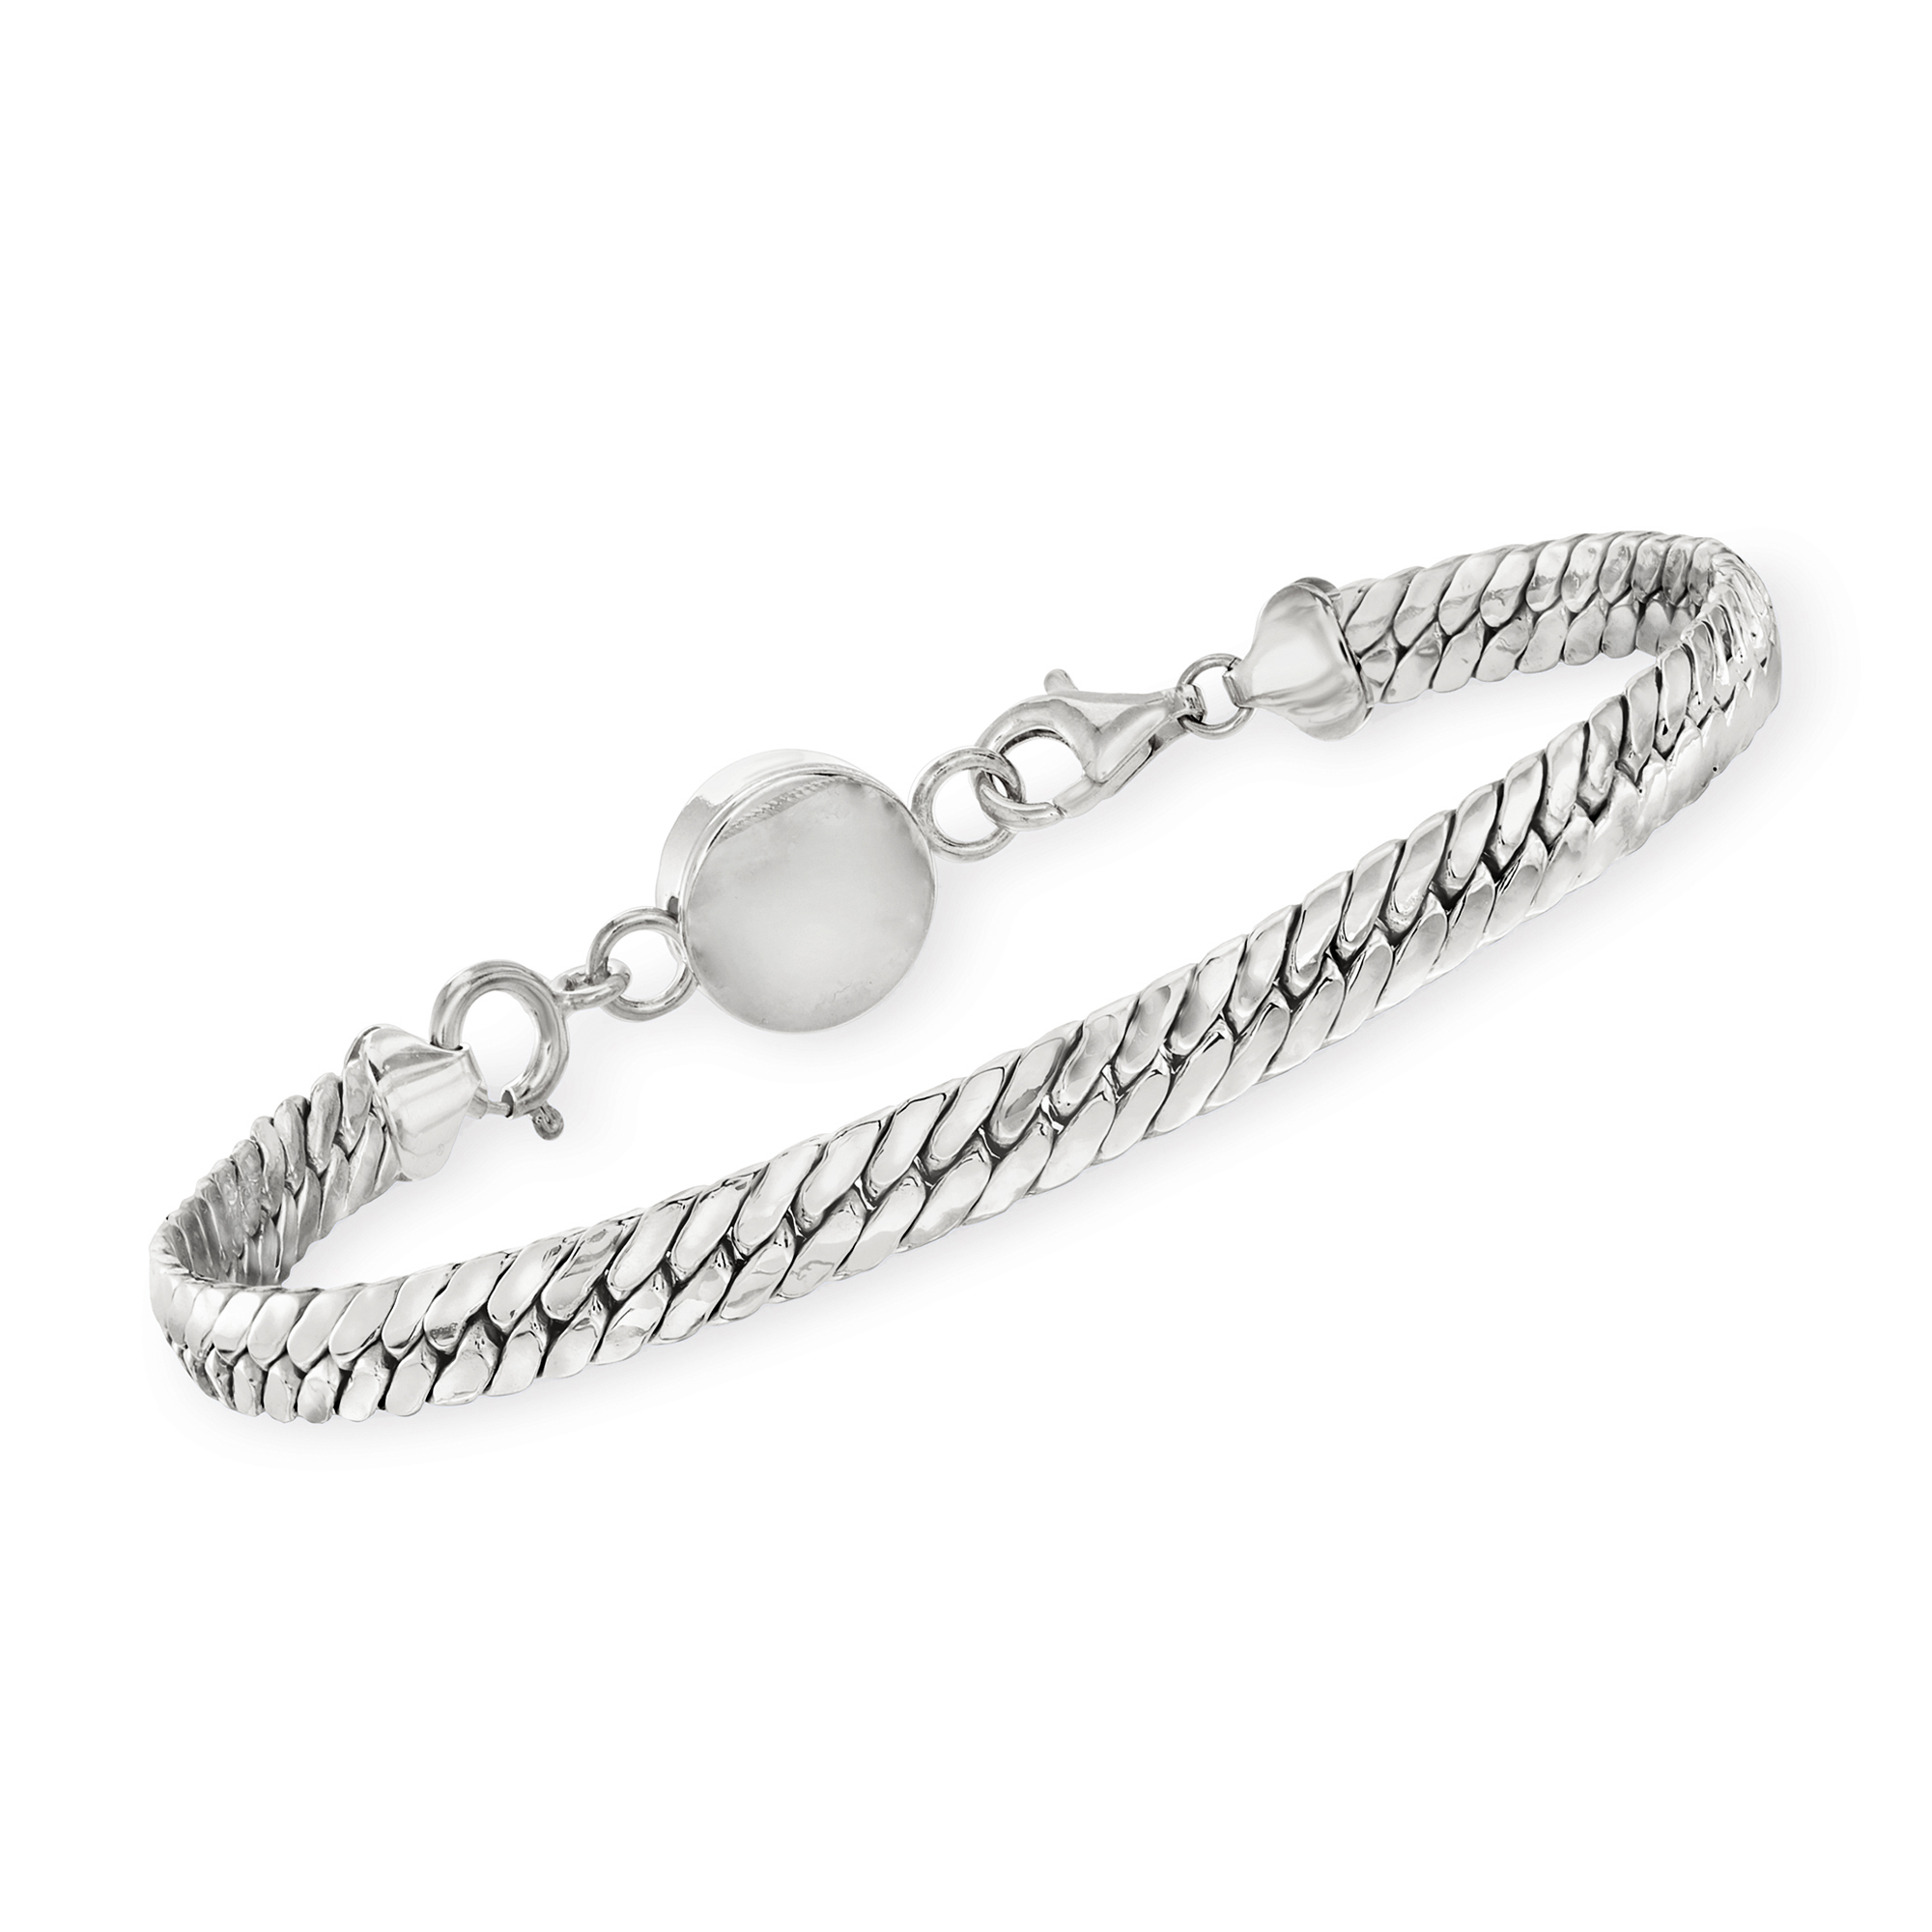 Ross-Simons Italian Sterling Silver Diamond-Cut Magnetic Clasp Converter, Women's, Adult - image 4 of 4